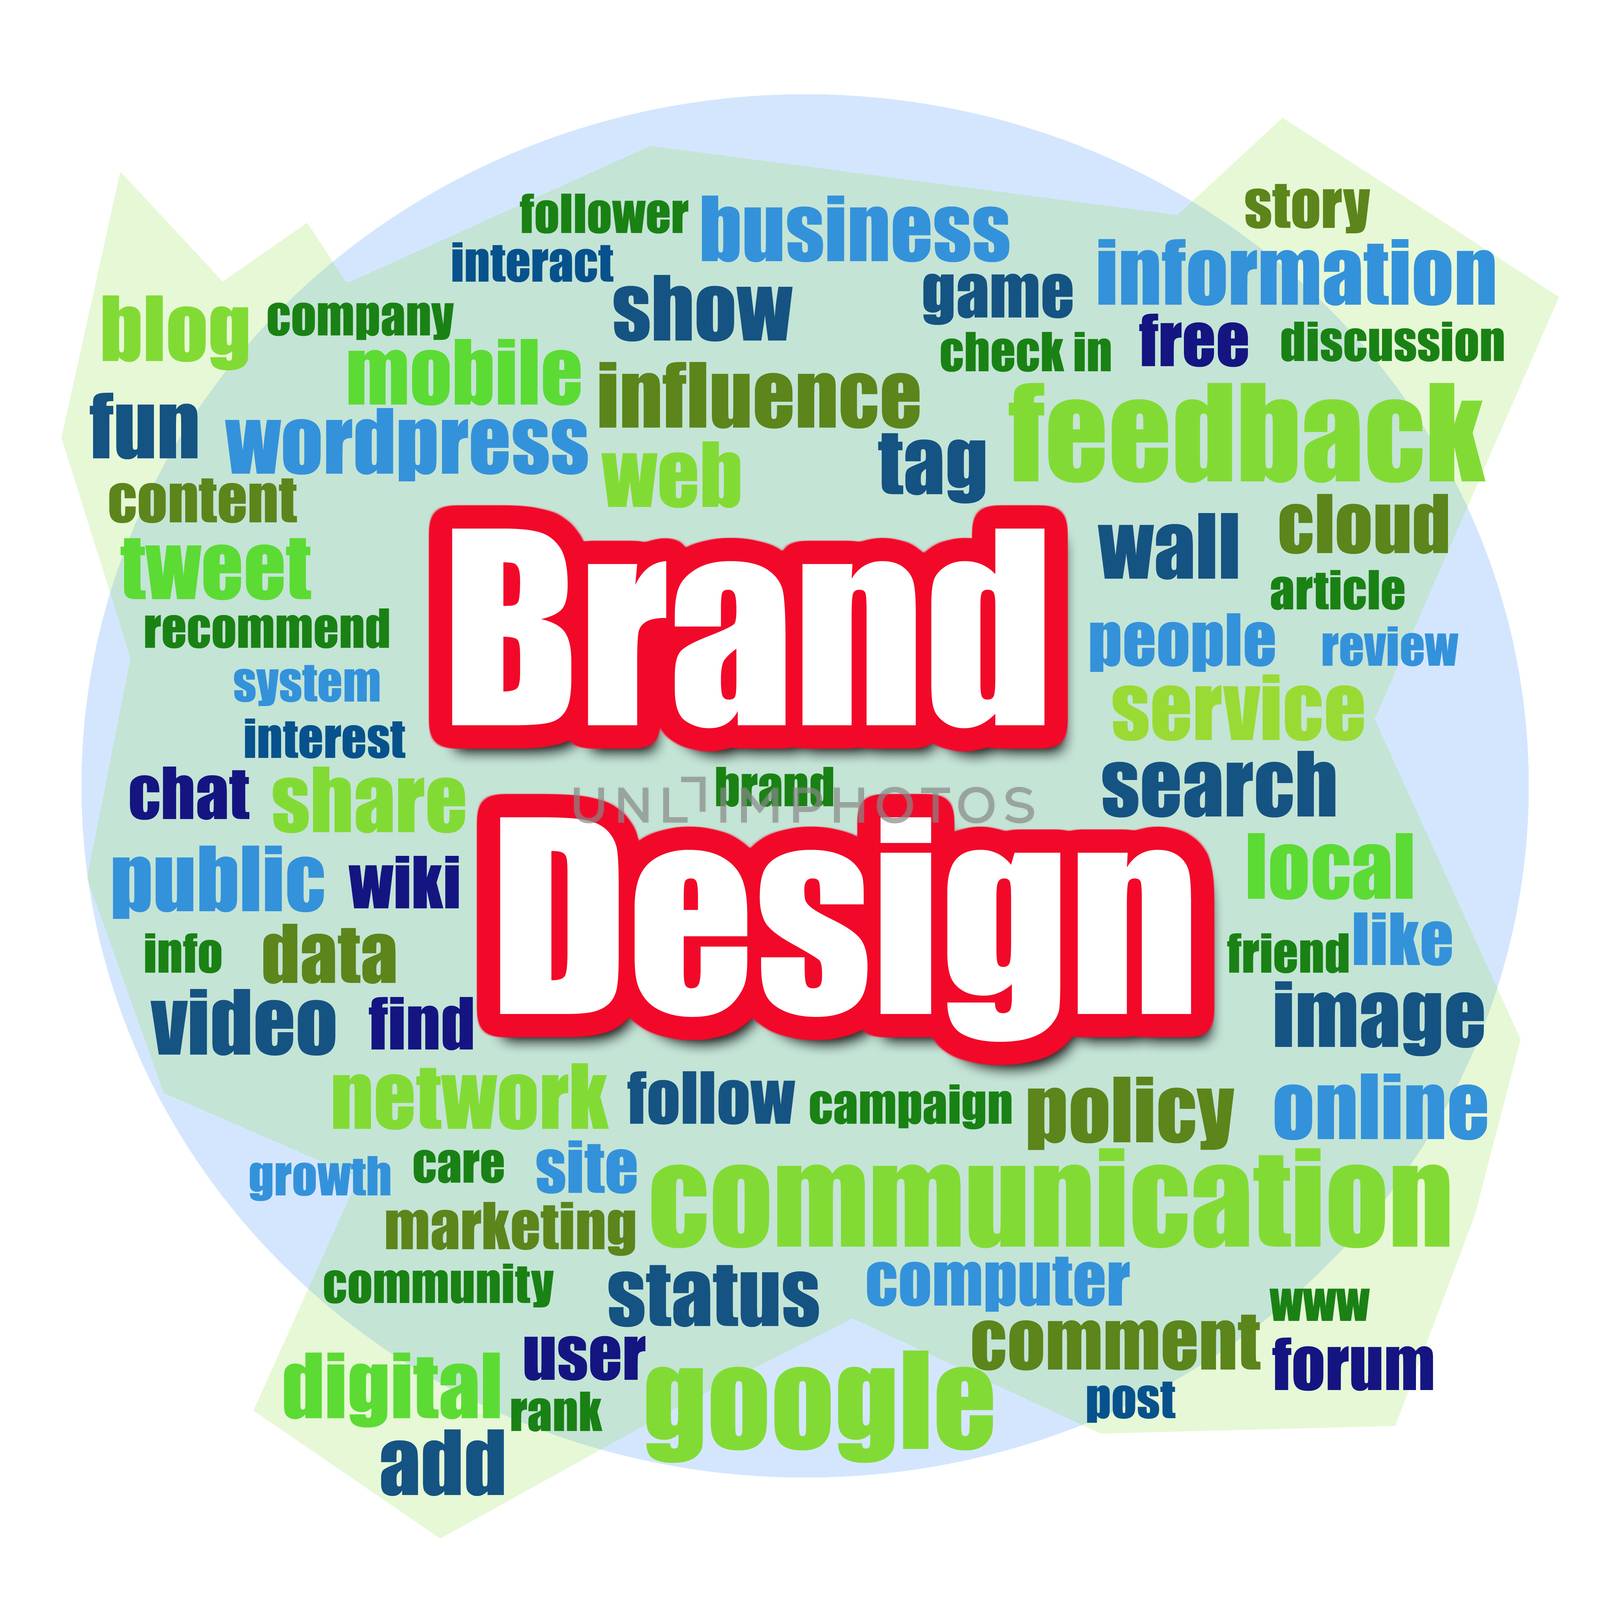 Brand design word cloud image with hi-res rendered artwork that could be used for any graphic design.